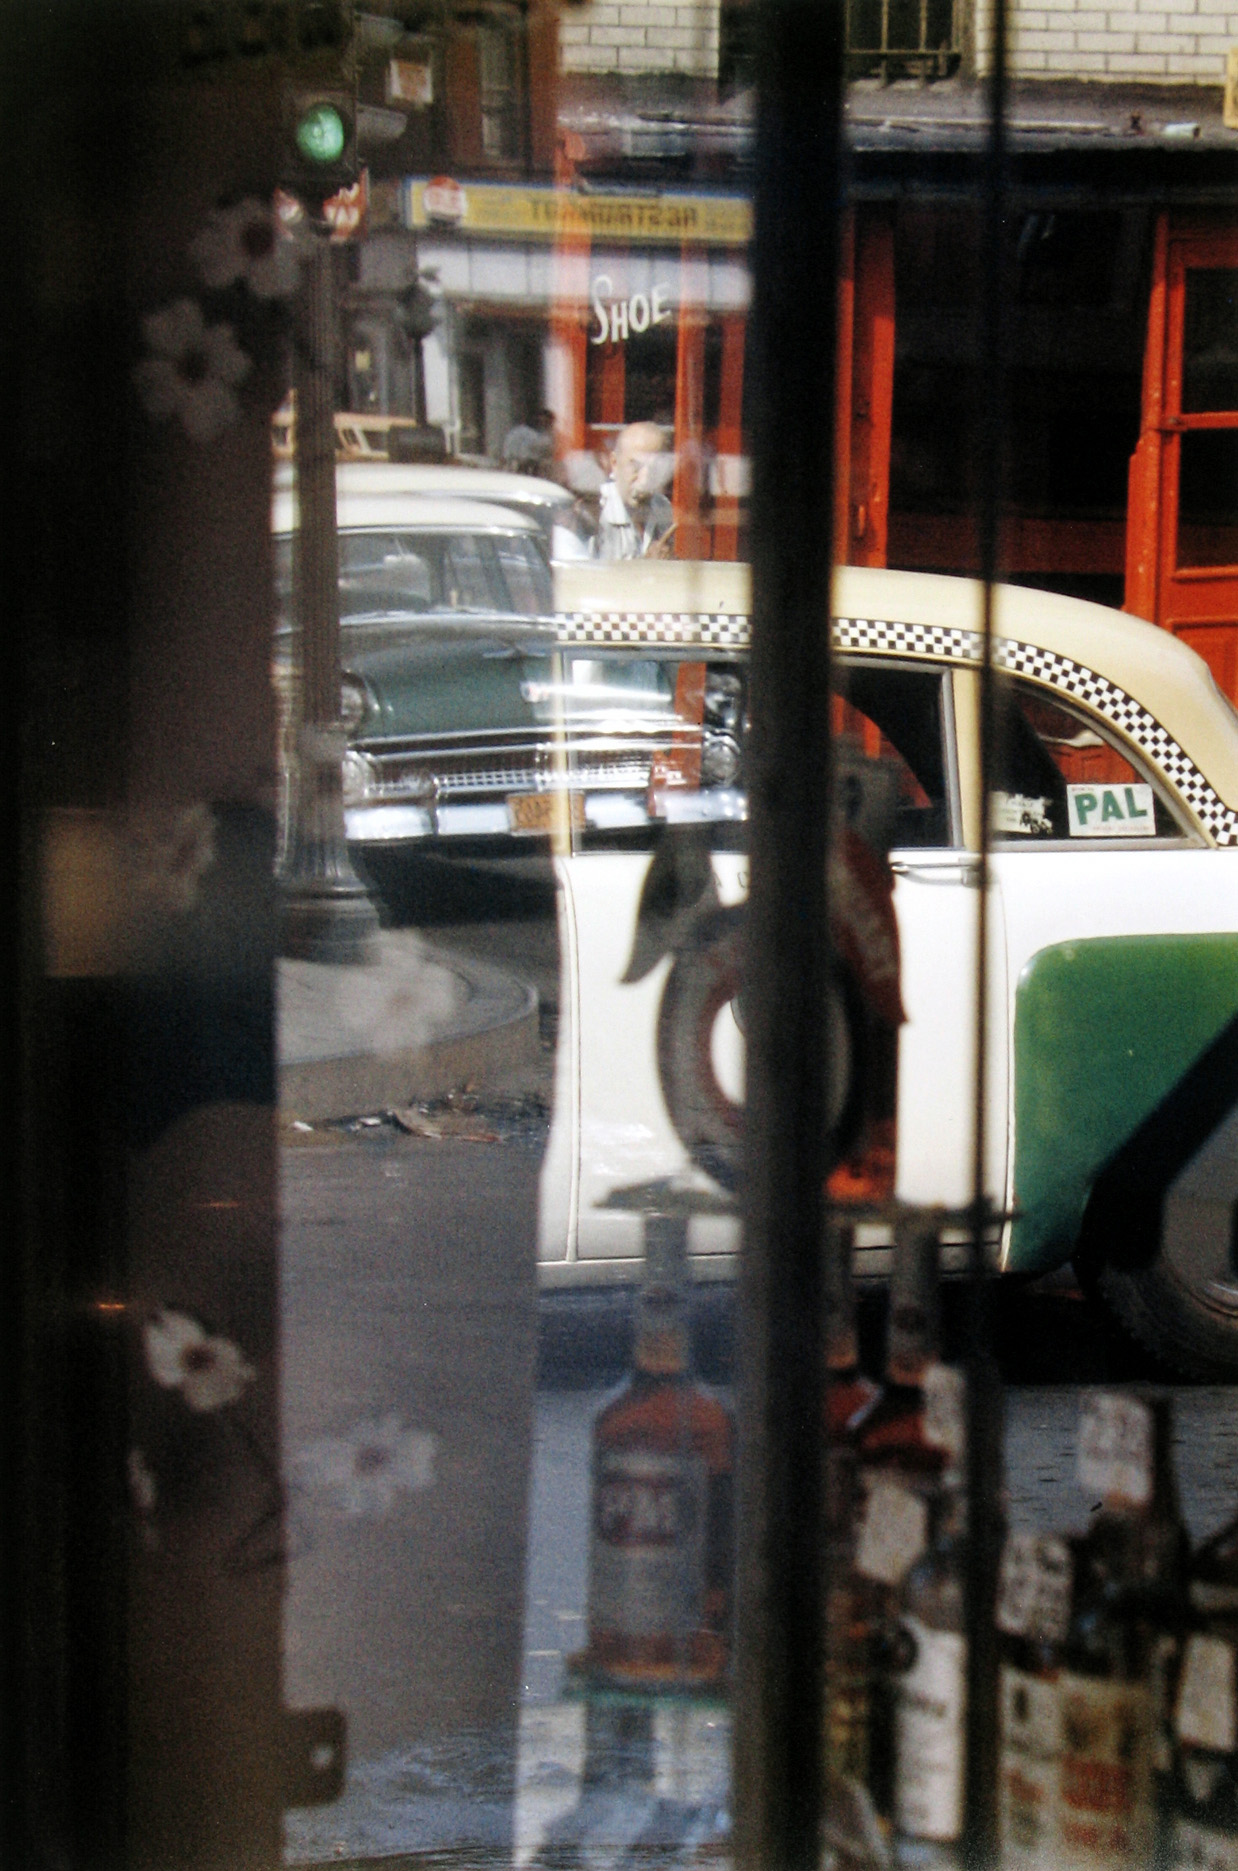 Saul leiter, Taxi, 1956, Howard Greenberg gallery, 2019